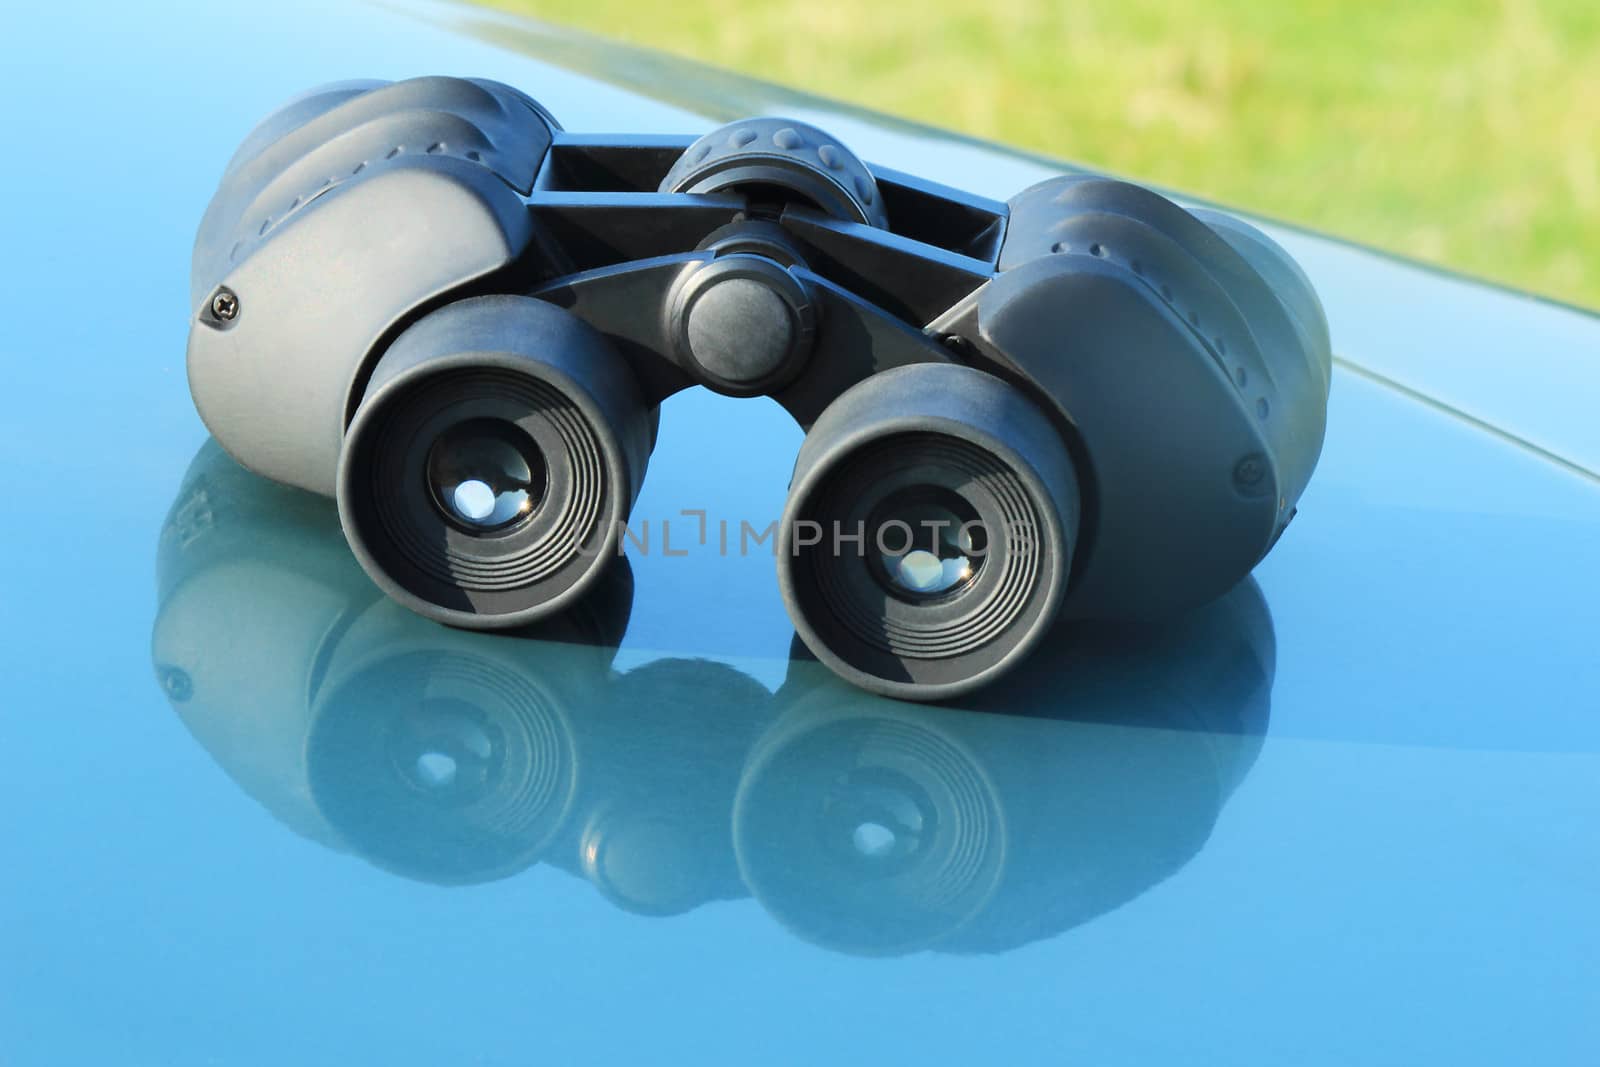 On the hood of a blue car is the binoculars.